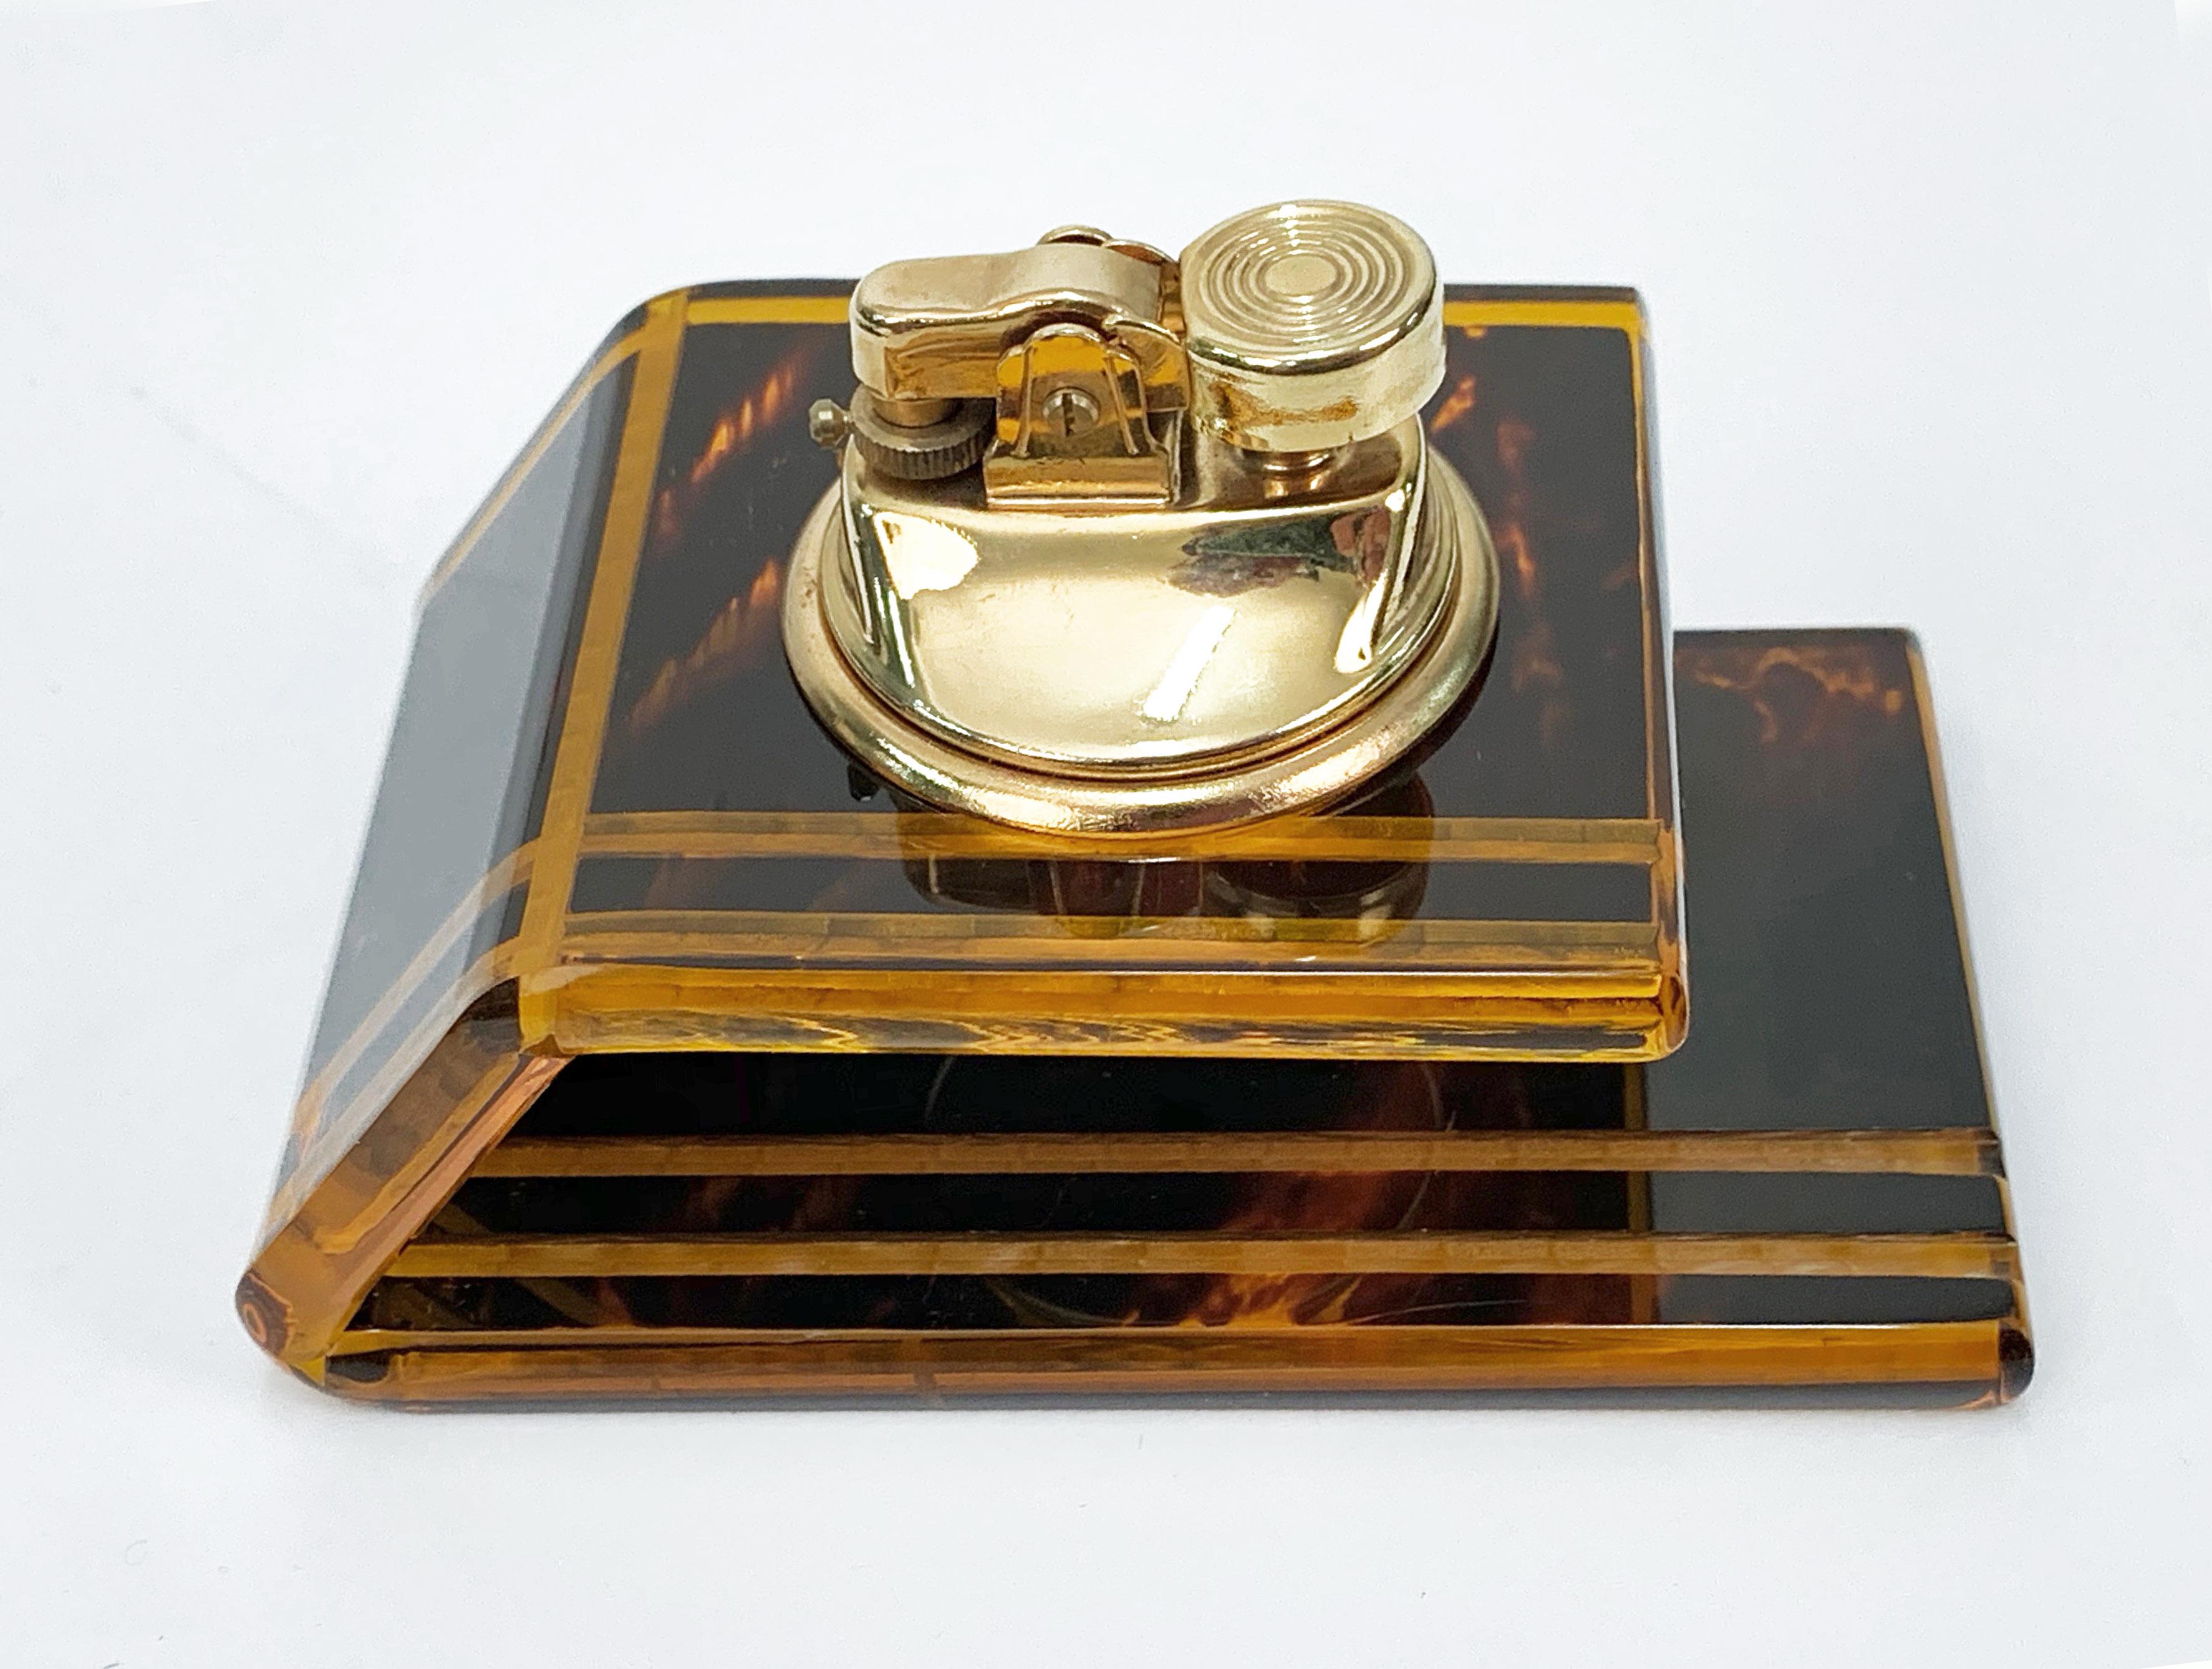 Amazing table lighter in Lucite, tortoise plexiglass and brass. Attributed to Christian Dior and produced in France during 1970s.

The item has a never-ending charm due to not having been used. It has wonderful squared lines, blunted on the